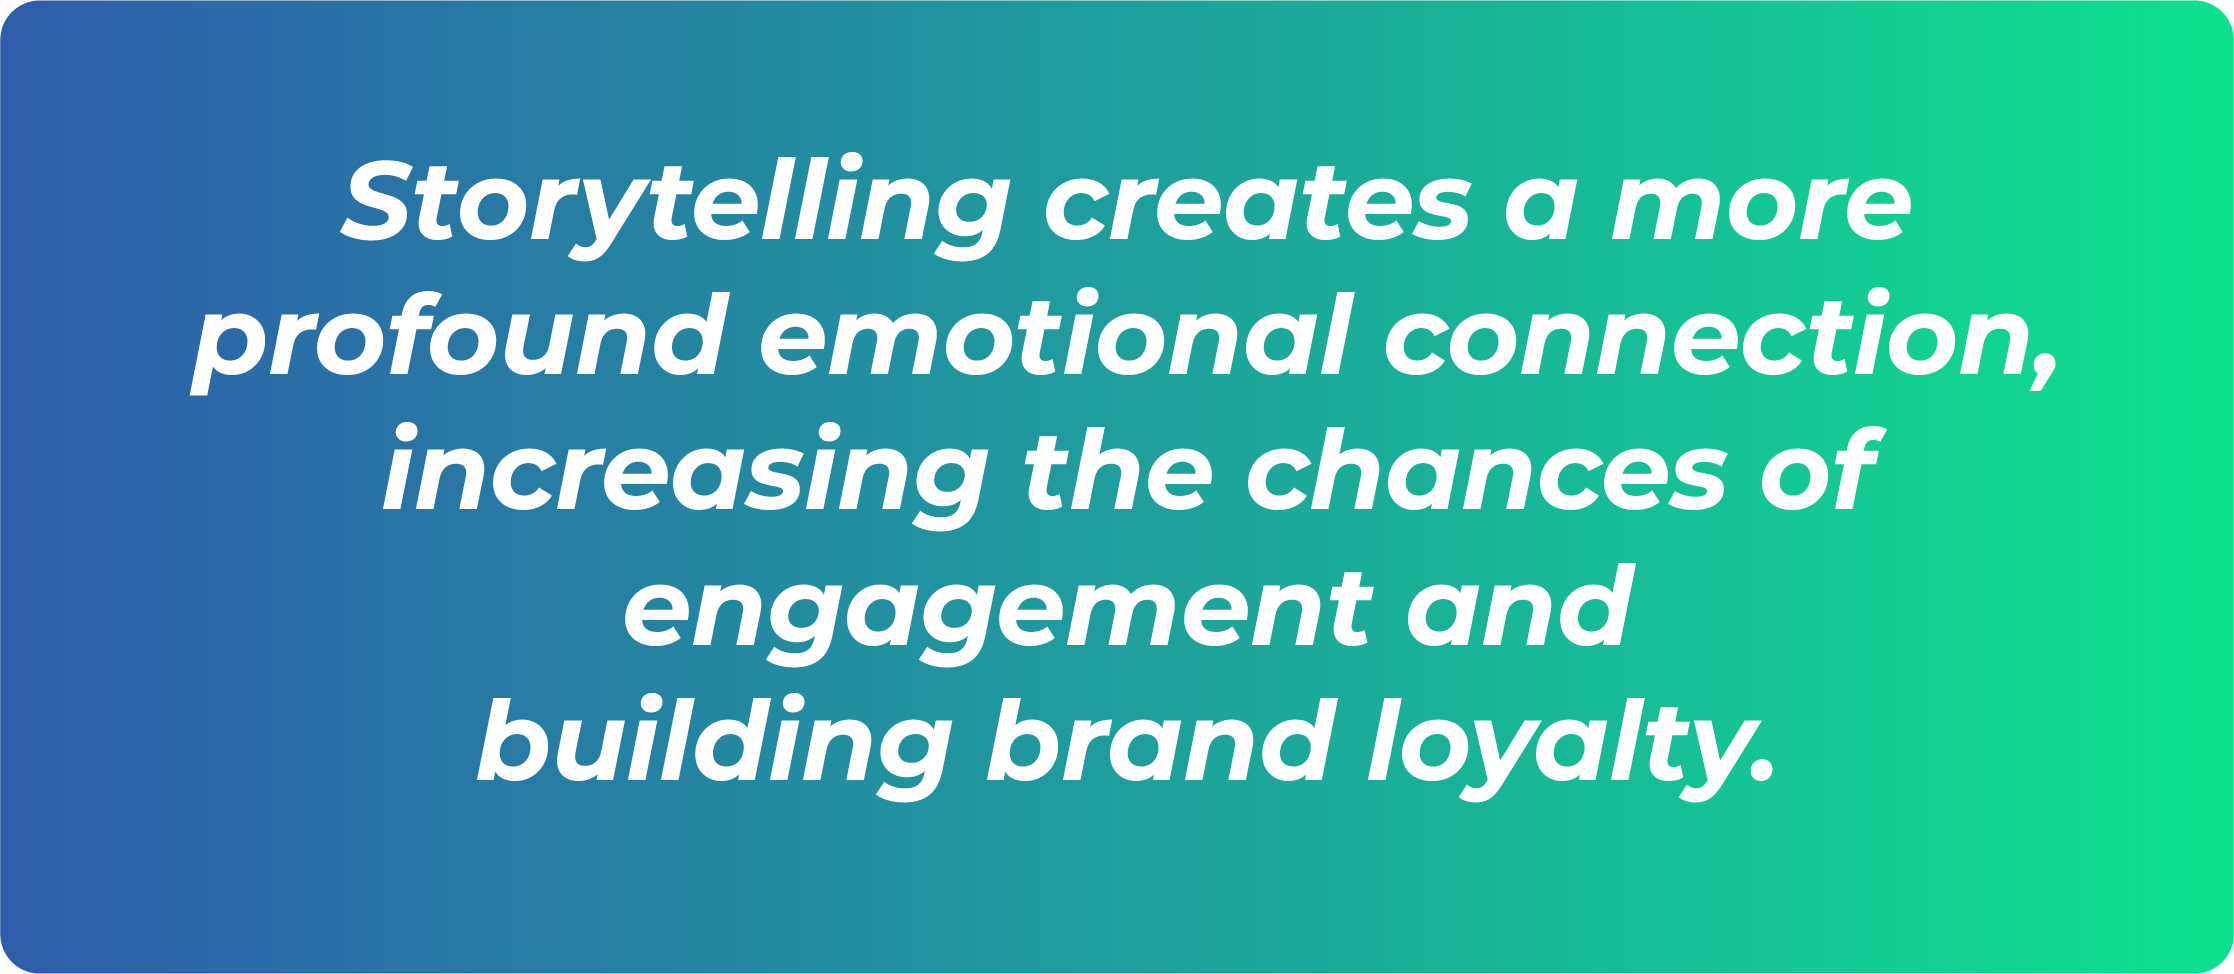 Storytelling creates a more profound emotional connection, increasing the chances of engagement and building brand loyalty.